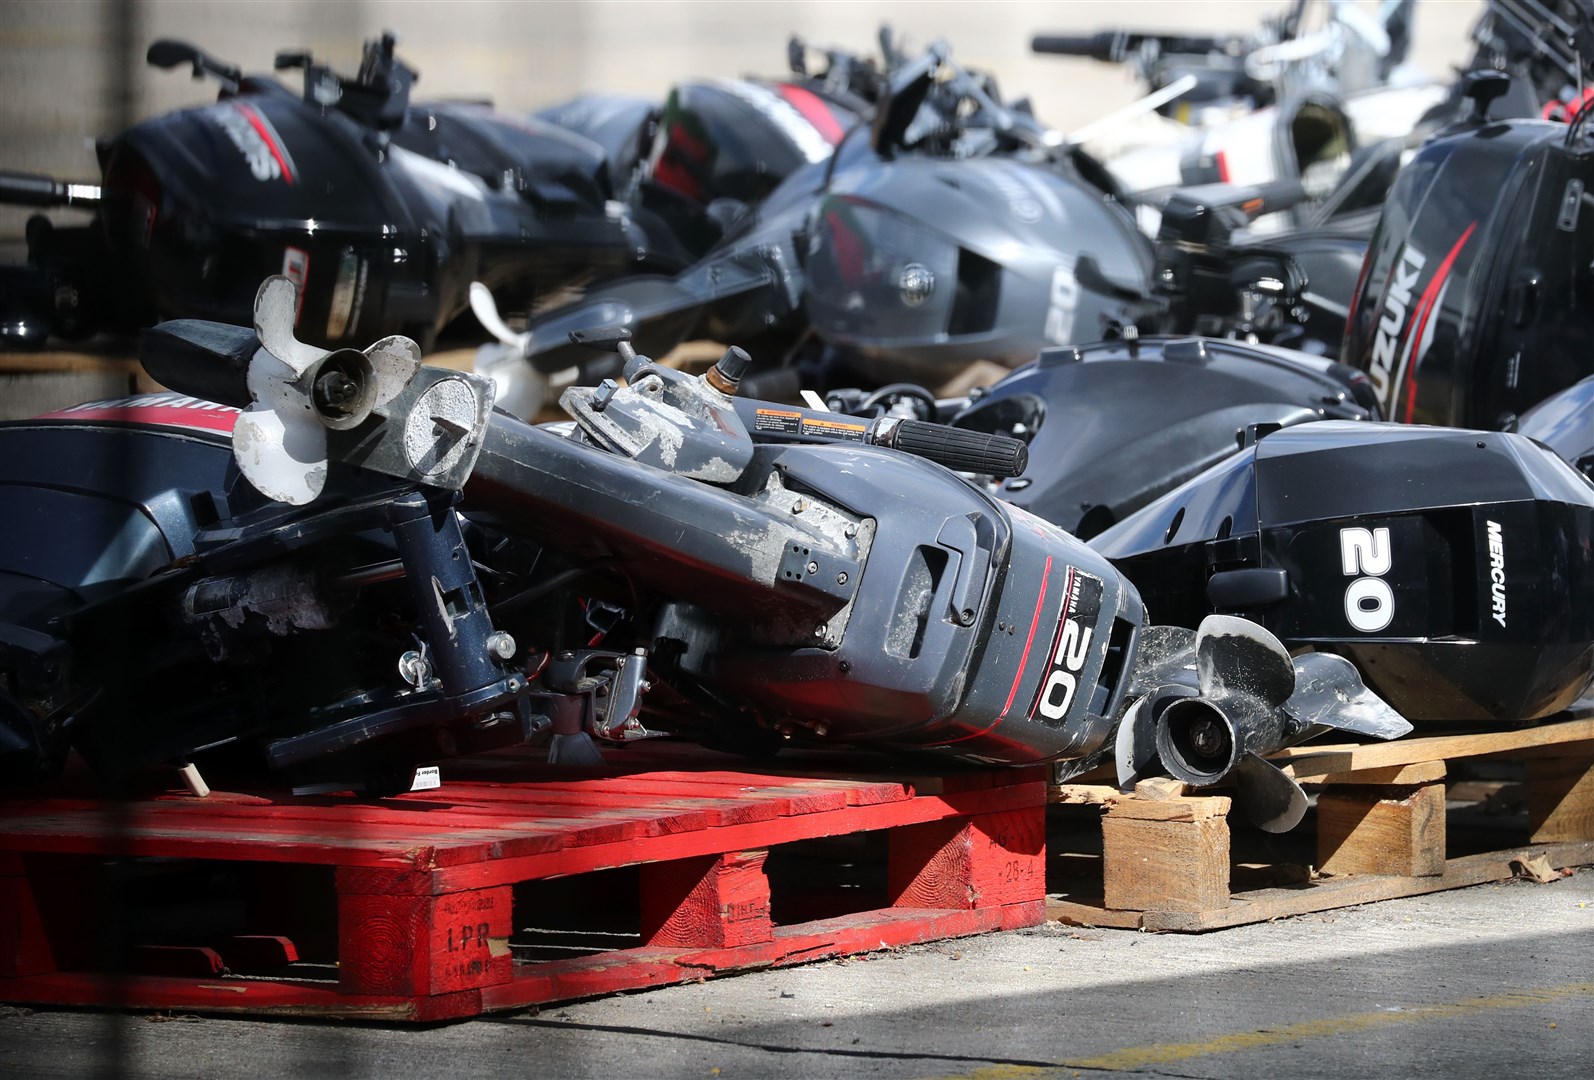 A view of outboard engines for small boats thought to be used in migrant crossings across the Channel at a storage facility in Dover, Kent (Gareth Fuller/PA)